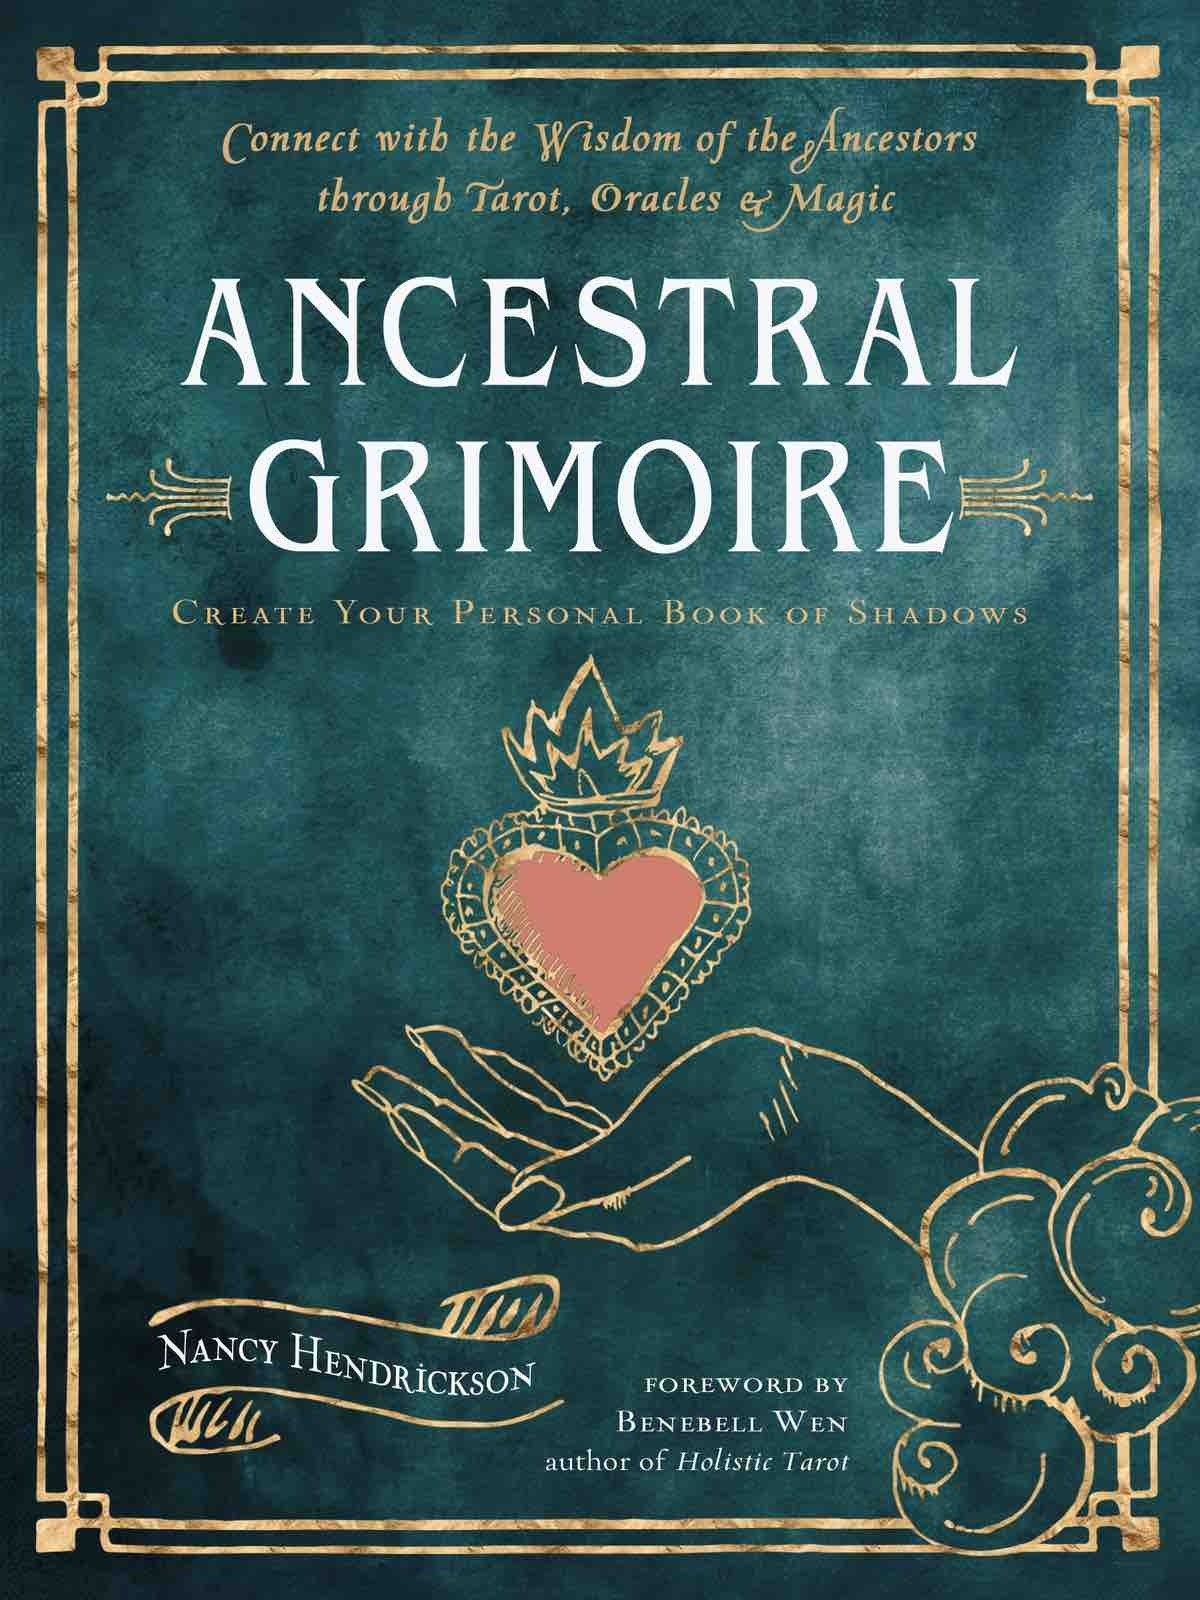 Ancestral Grimoire: Connect with the Wisdom of the Ancestors Through Tarot, Oracles, and Magic Create Your Personal Book of Shadows